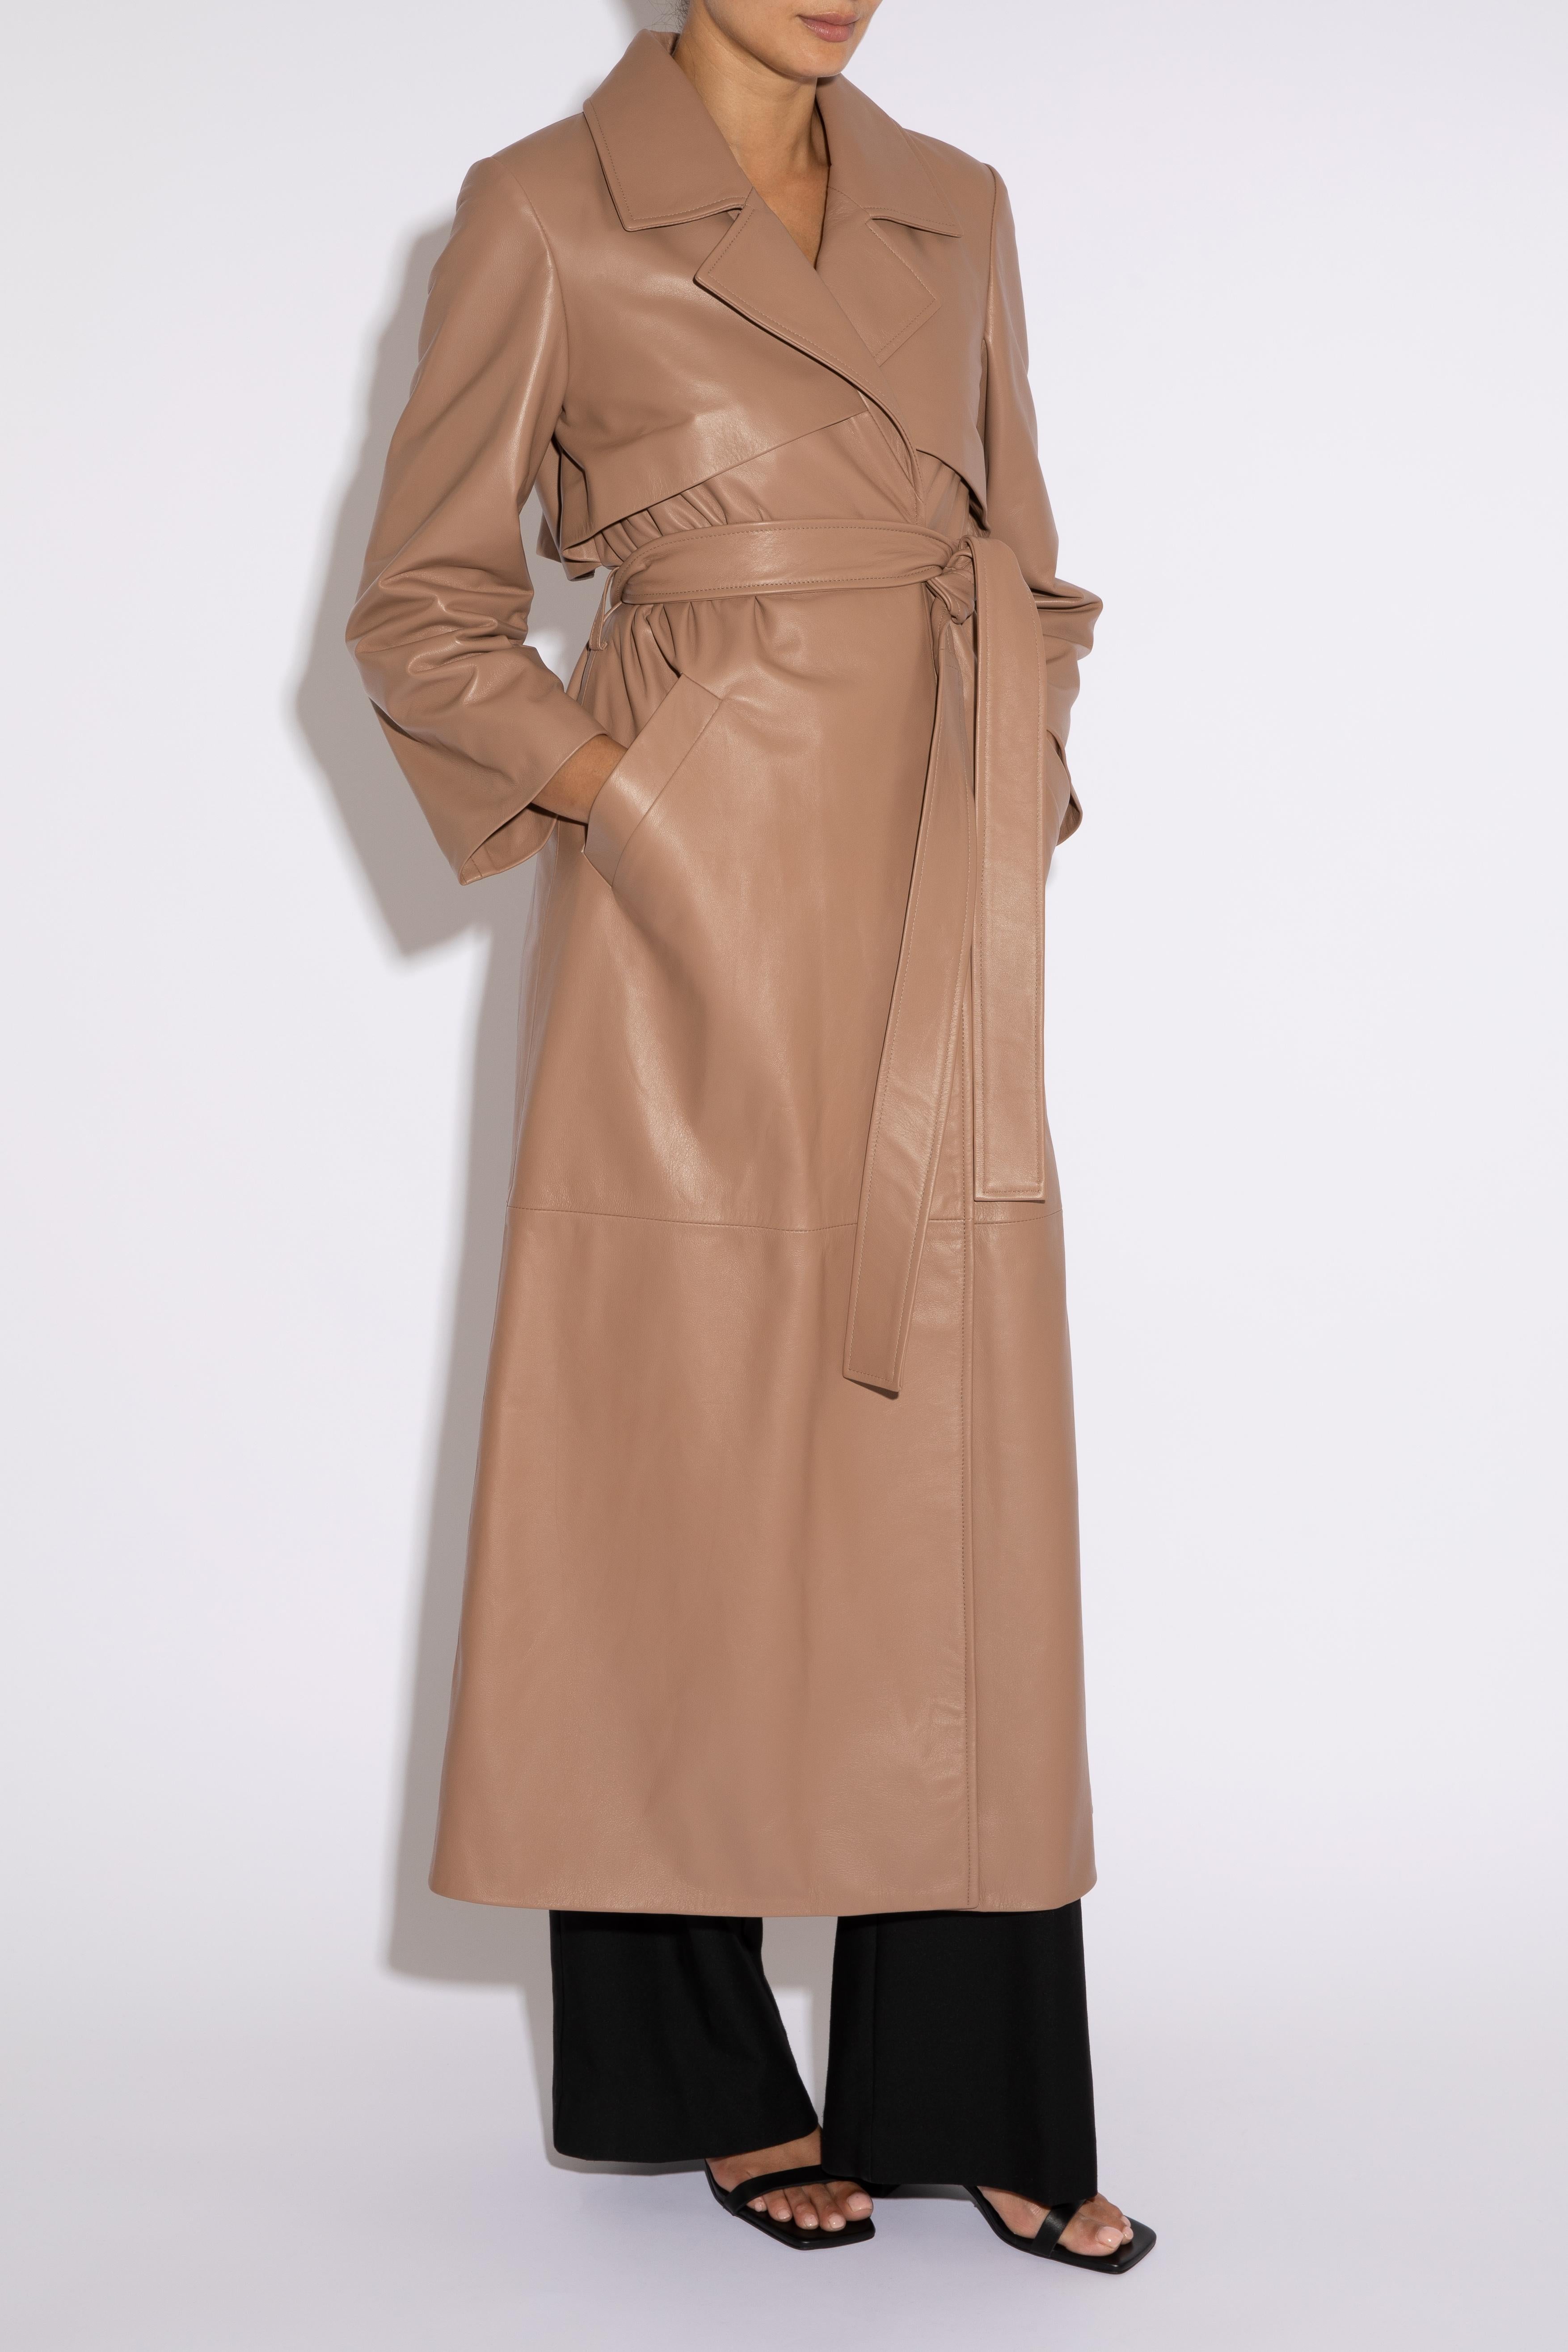 Women's Verheyen London Leather Trench Coat in Taupe Brown - Size uk 6 For Sale